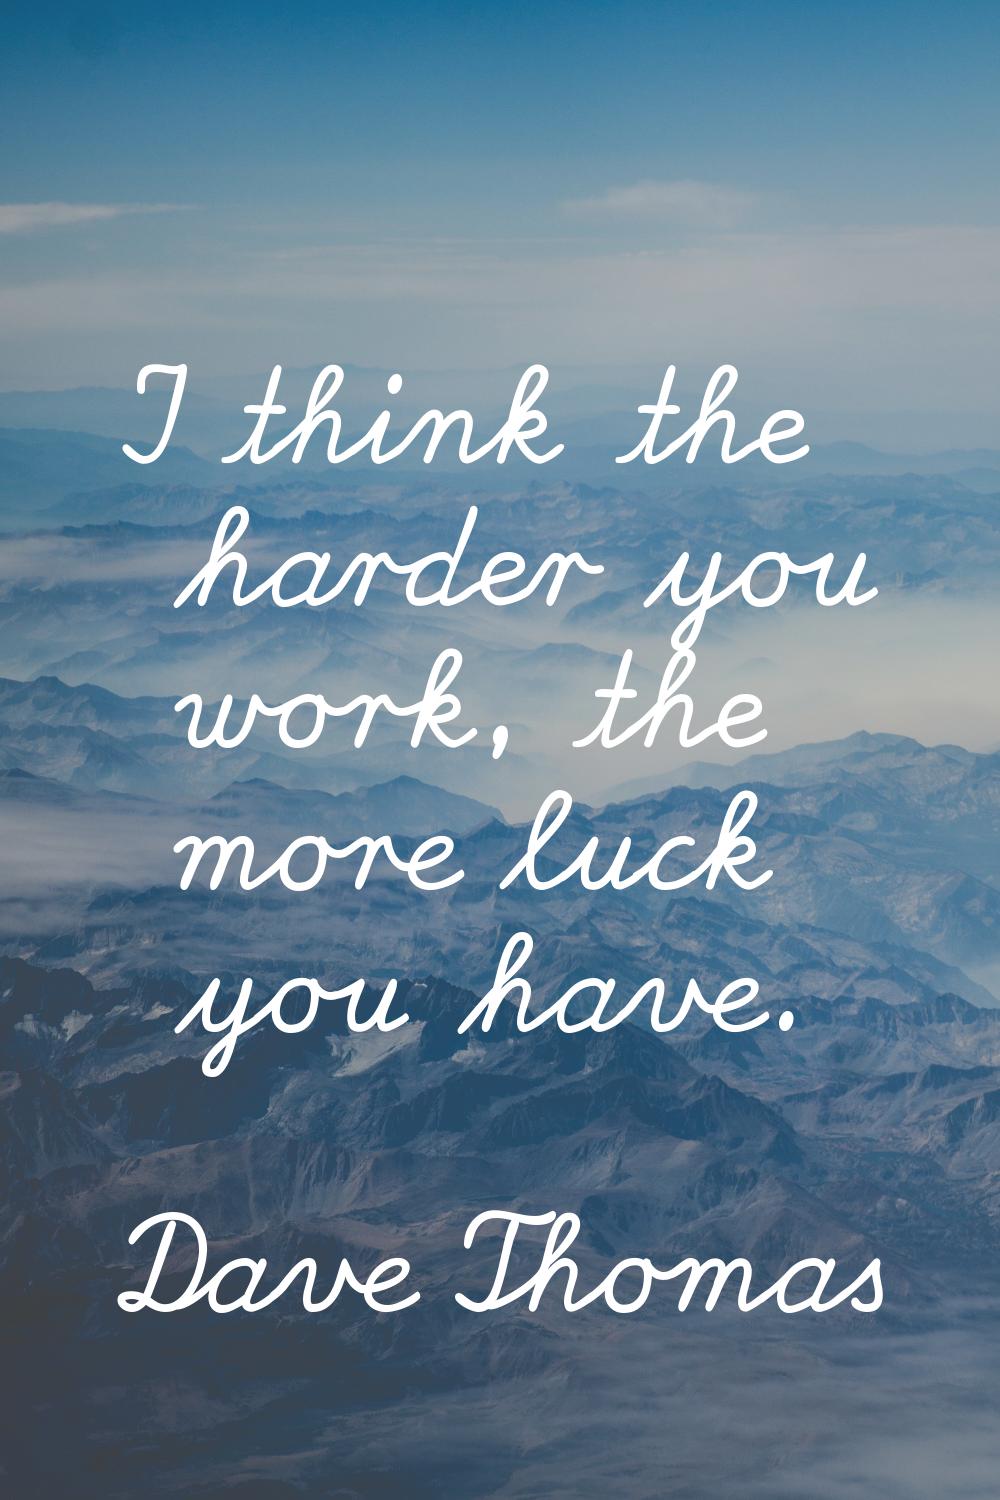 I think the harder you work, the more luck you have.